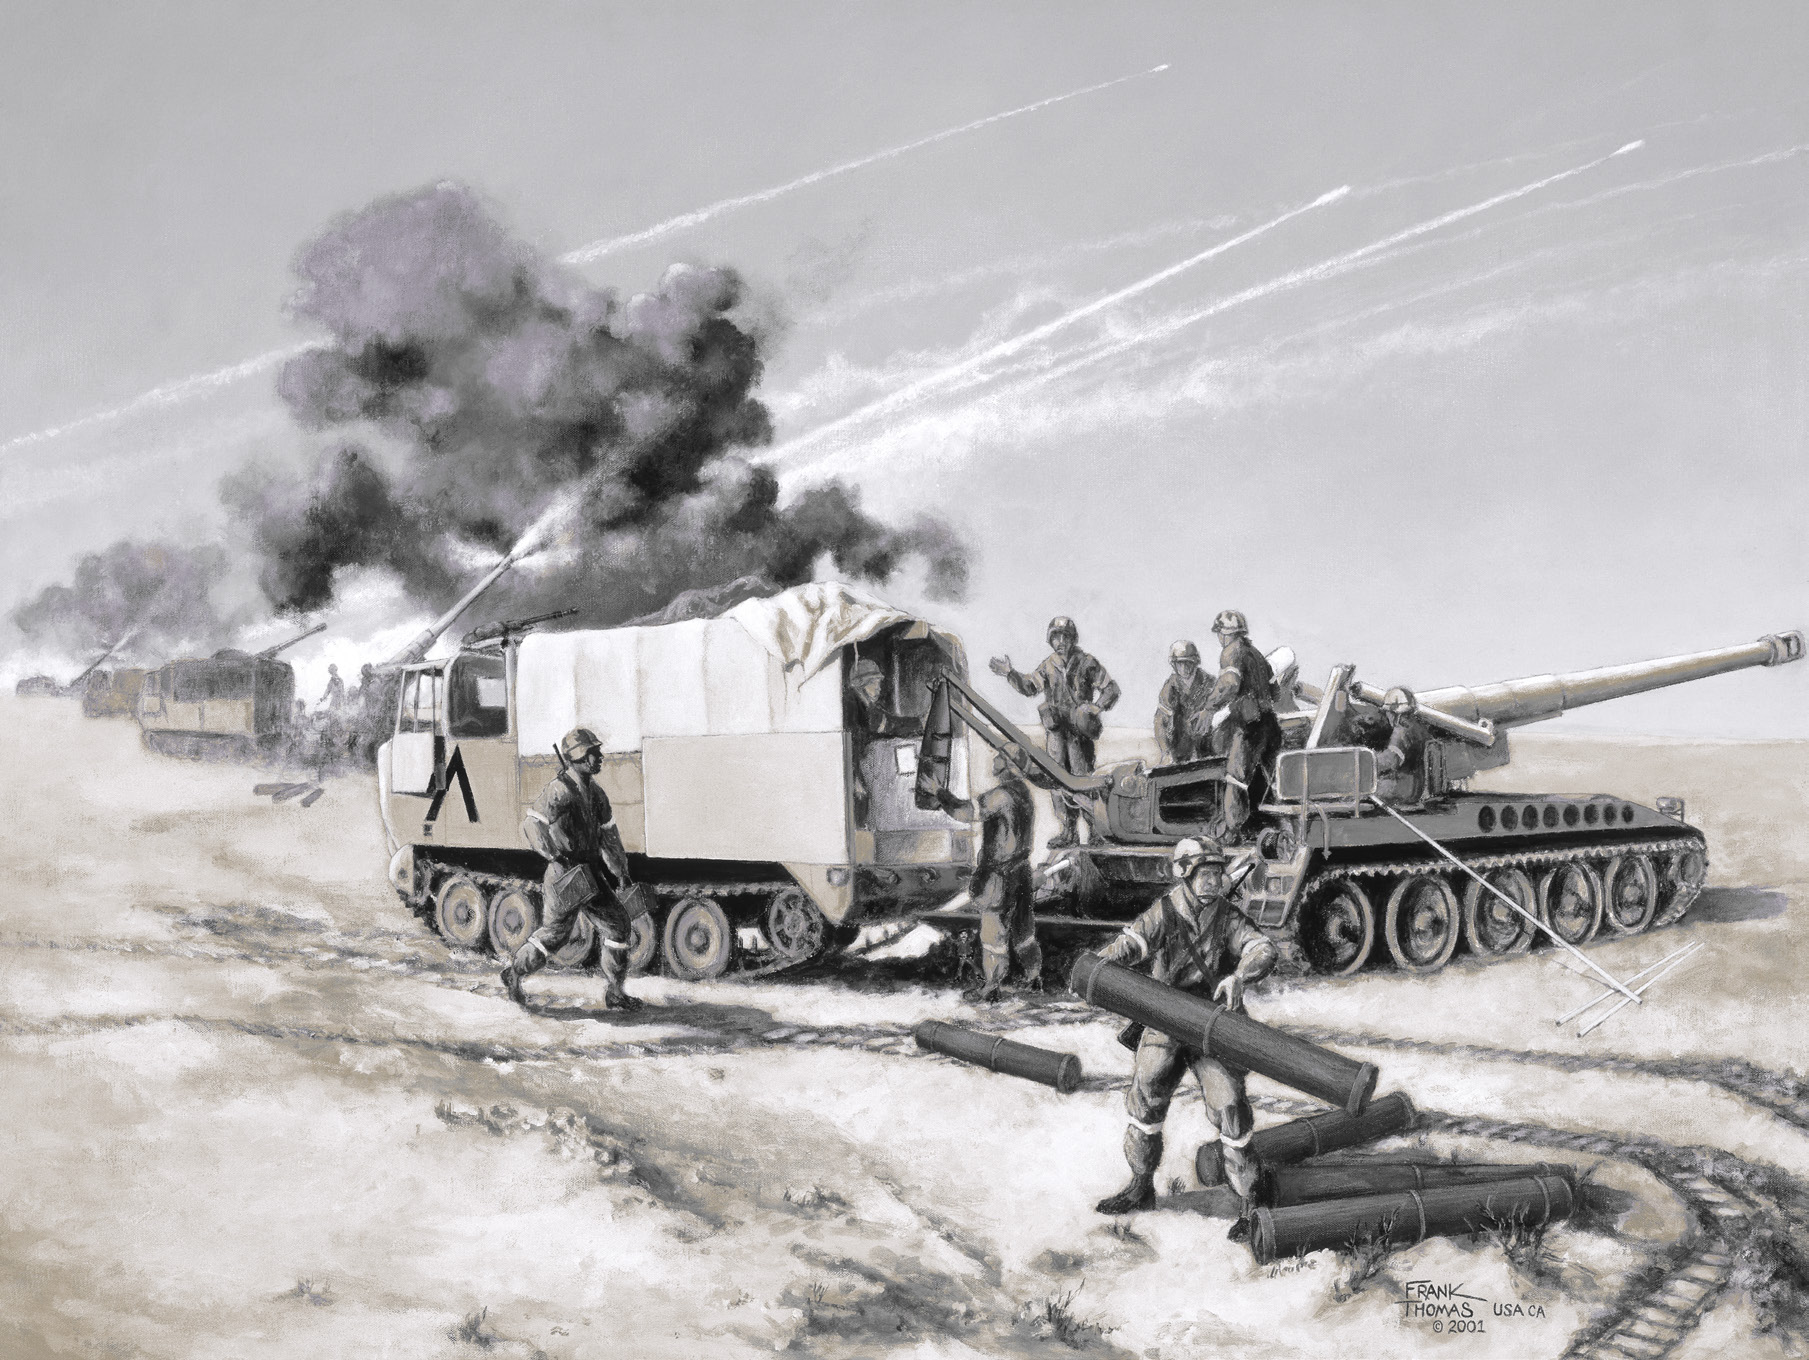 Thunder in the Desert: Arkansas National Guard 142nd Brigade Firing in Desert Storm by U.S. Army combat artist Frank M. Thomas. Courtesy of the artist.